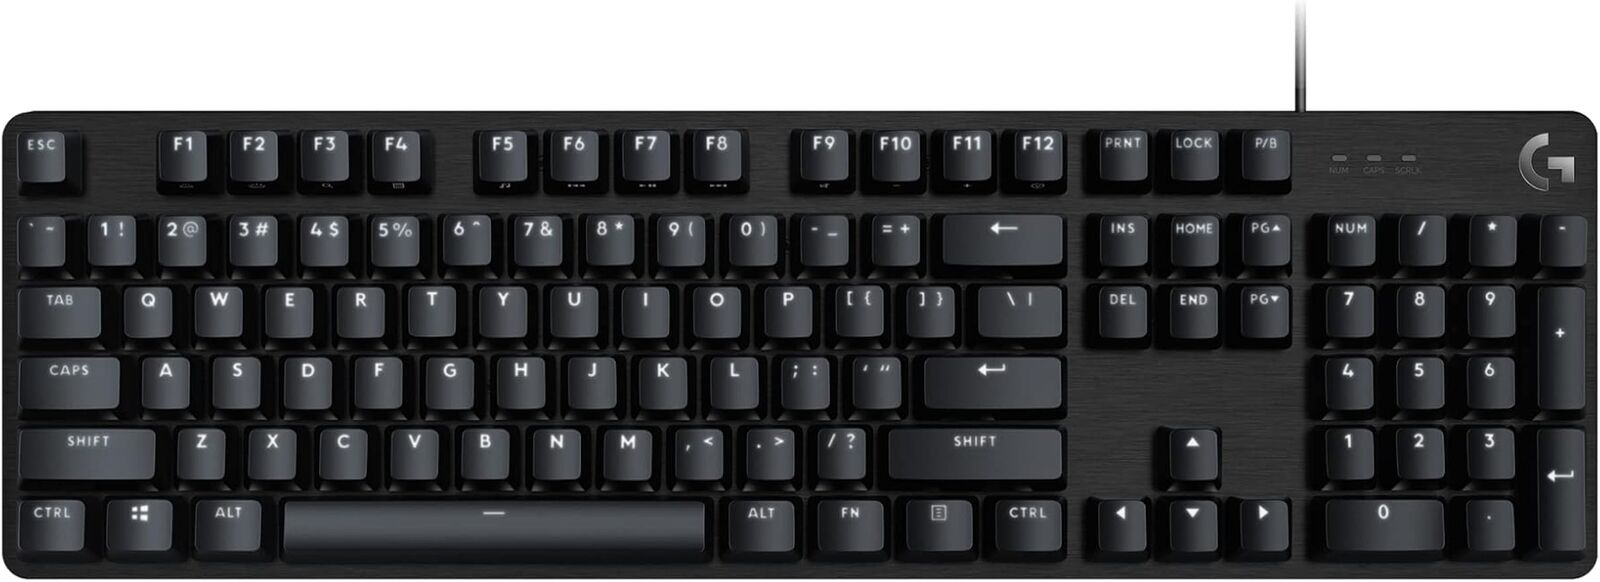 Full-Size Mechanical Keyboard-Backlit Keyboard with Tactile Mechanical Switches